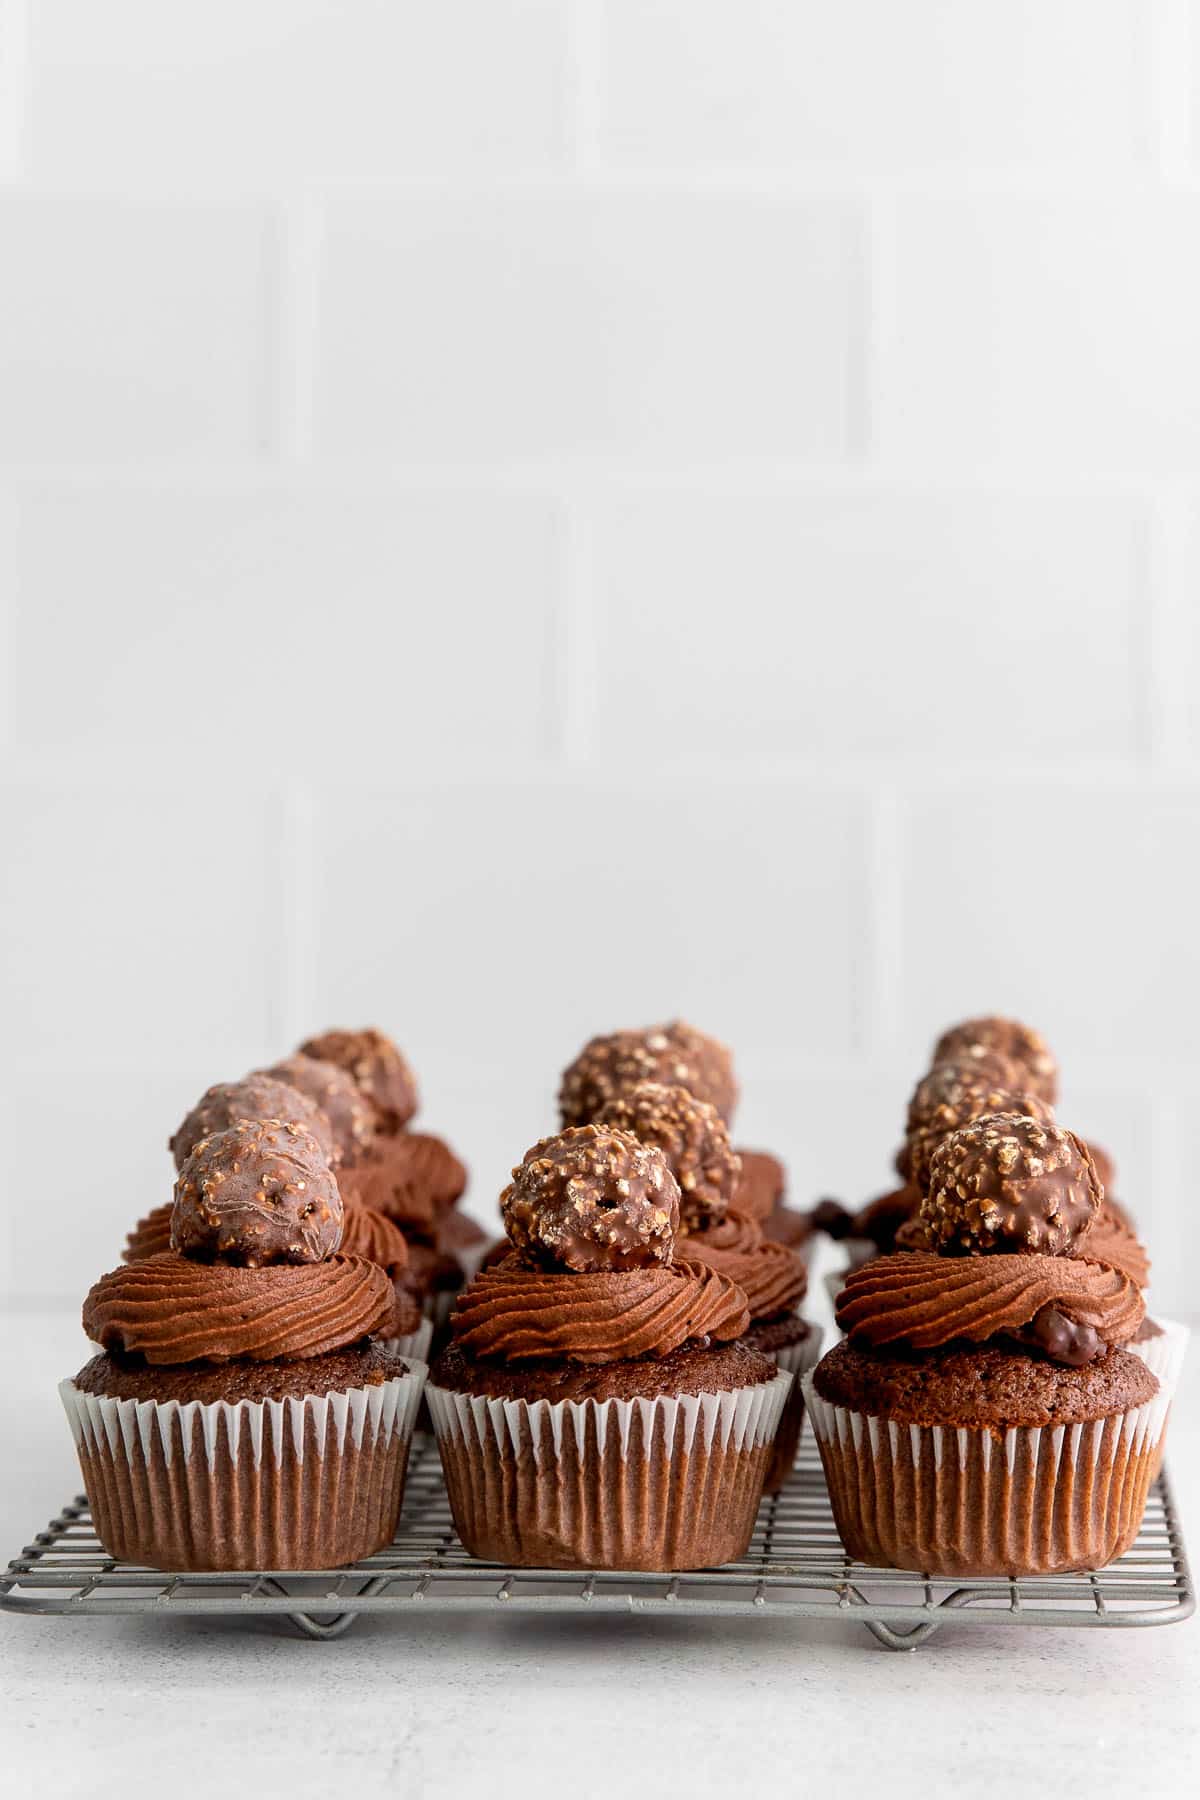 ferrero rocher cupcakes on a metal cooling rack side view.